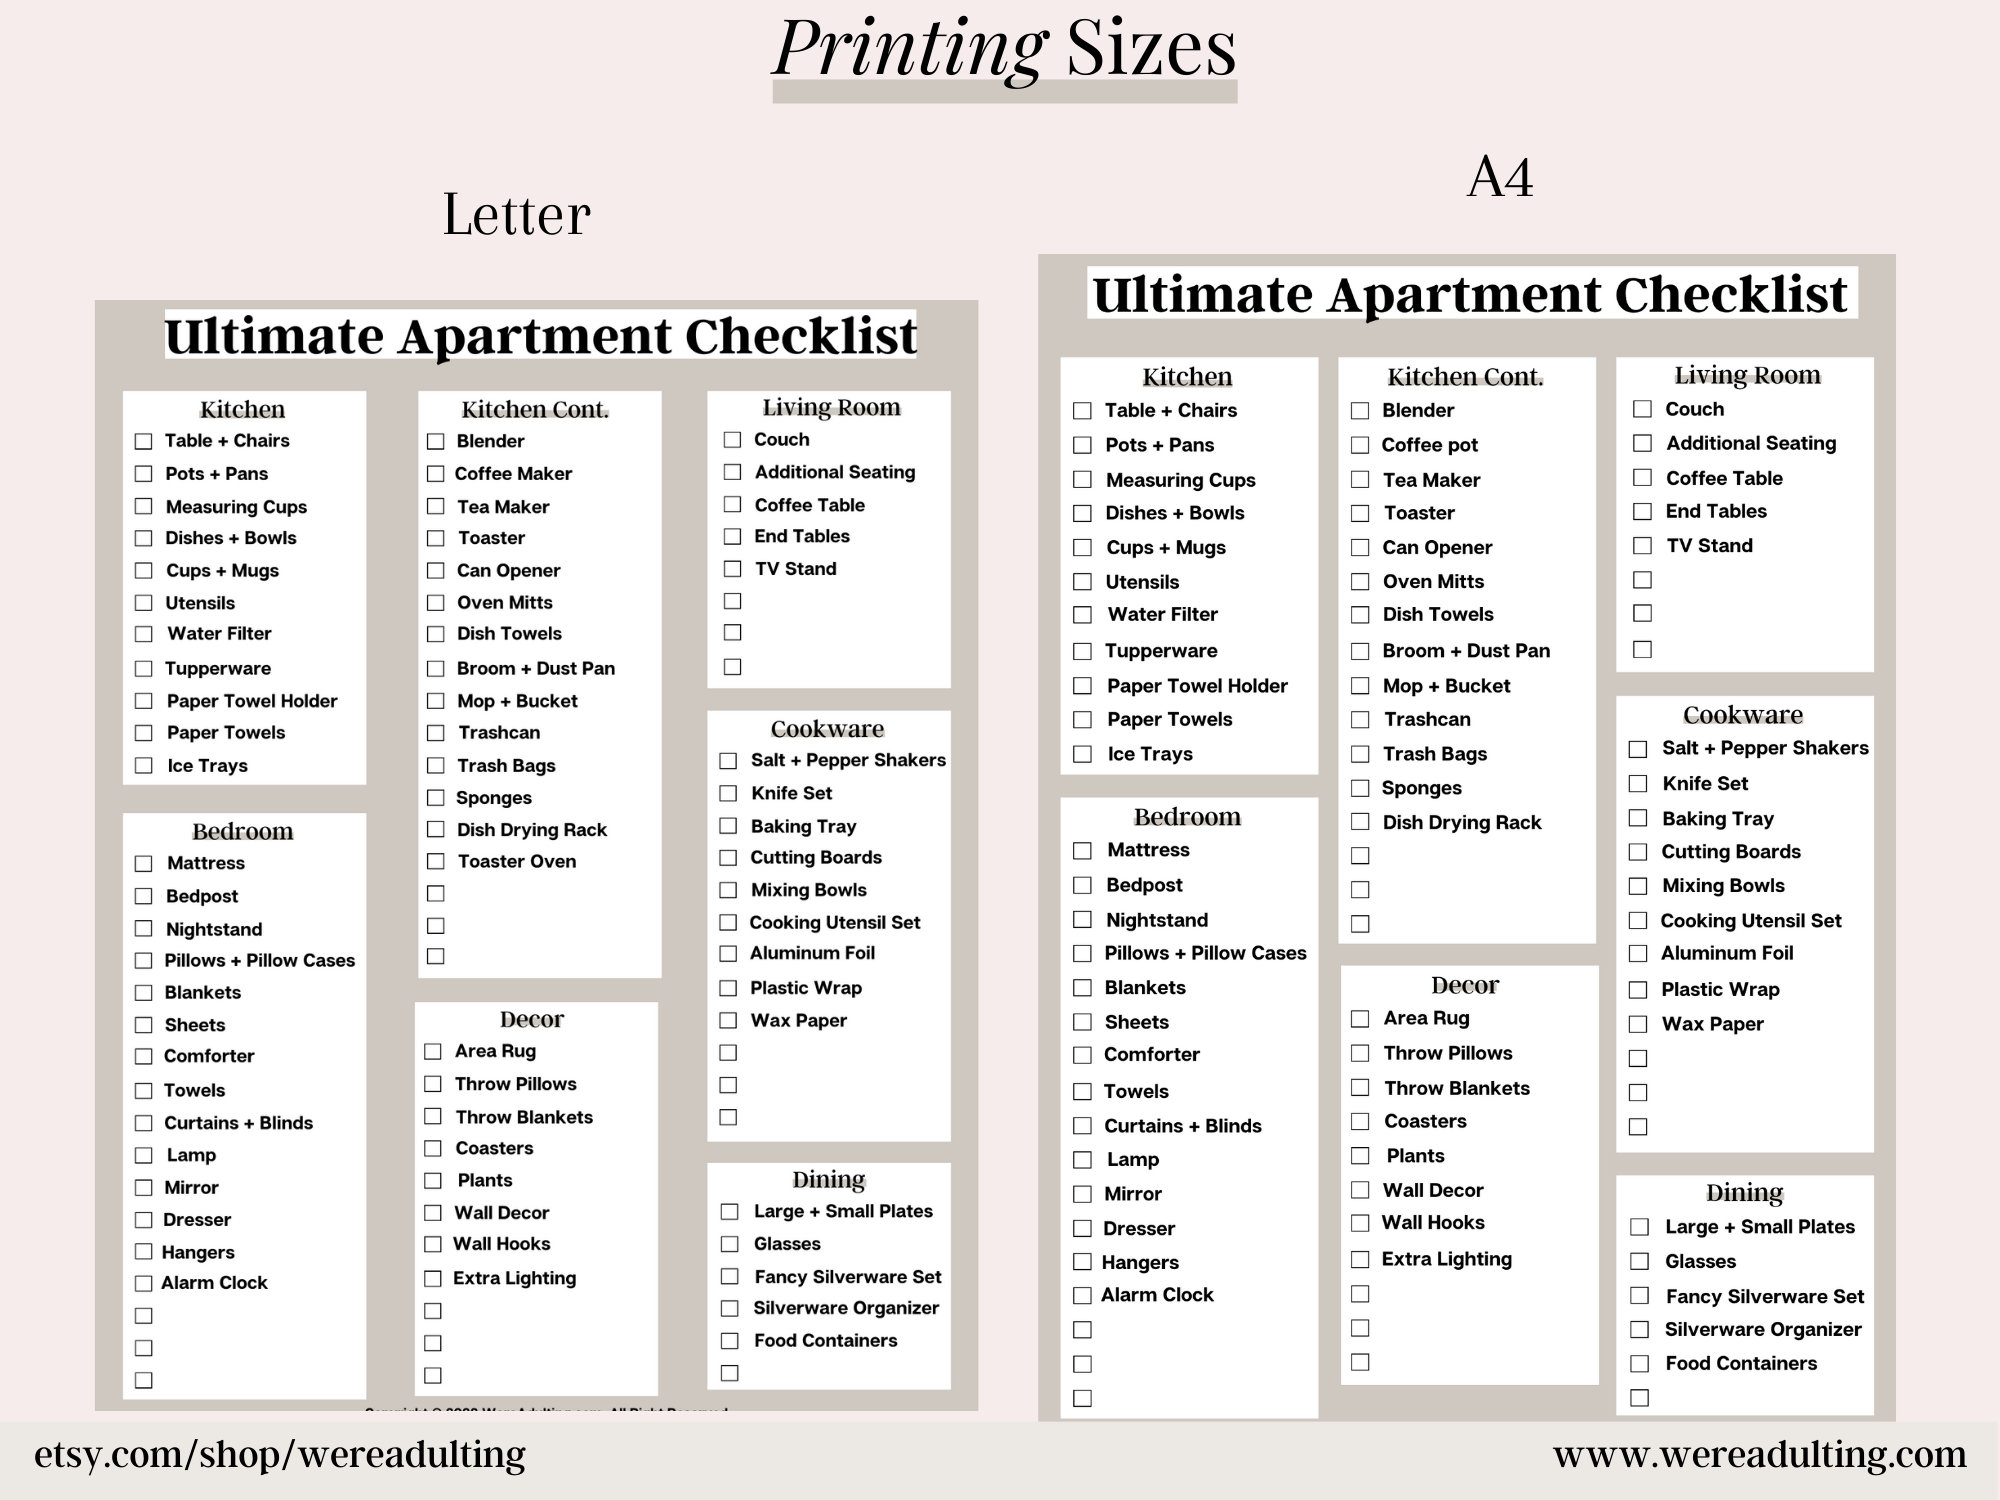 My First Apartment Checklist: FREE Printable